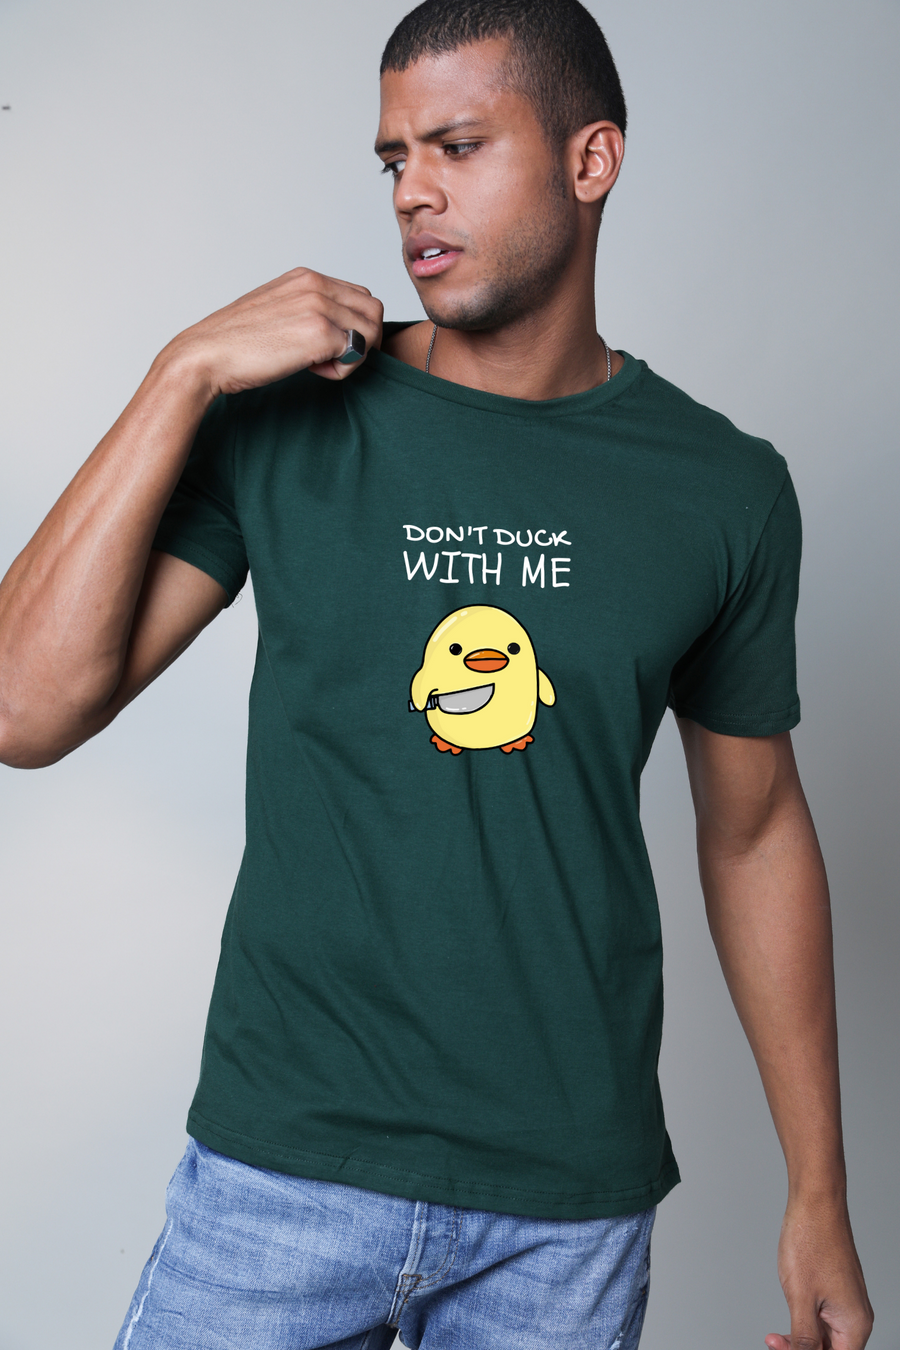 Don't duck with me- Half sleeve t-shirt